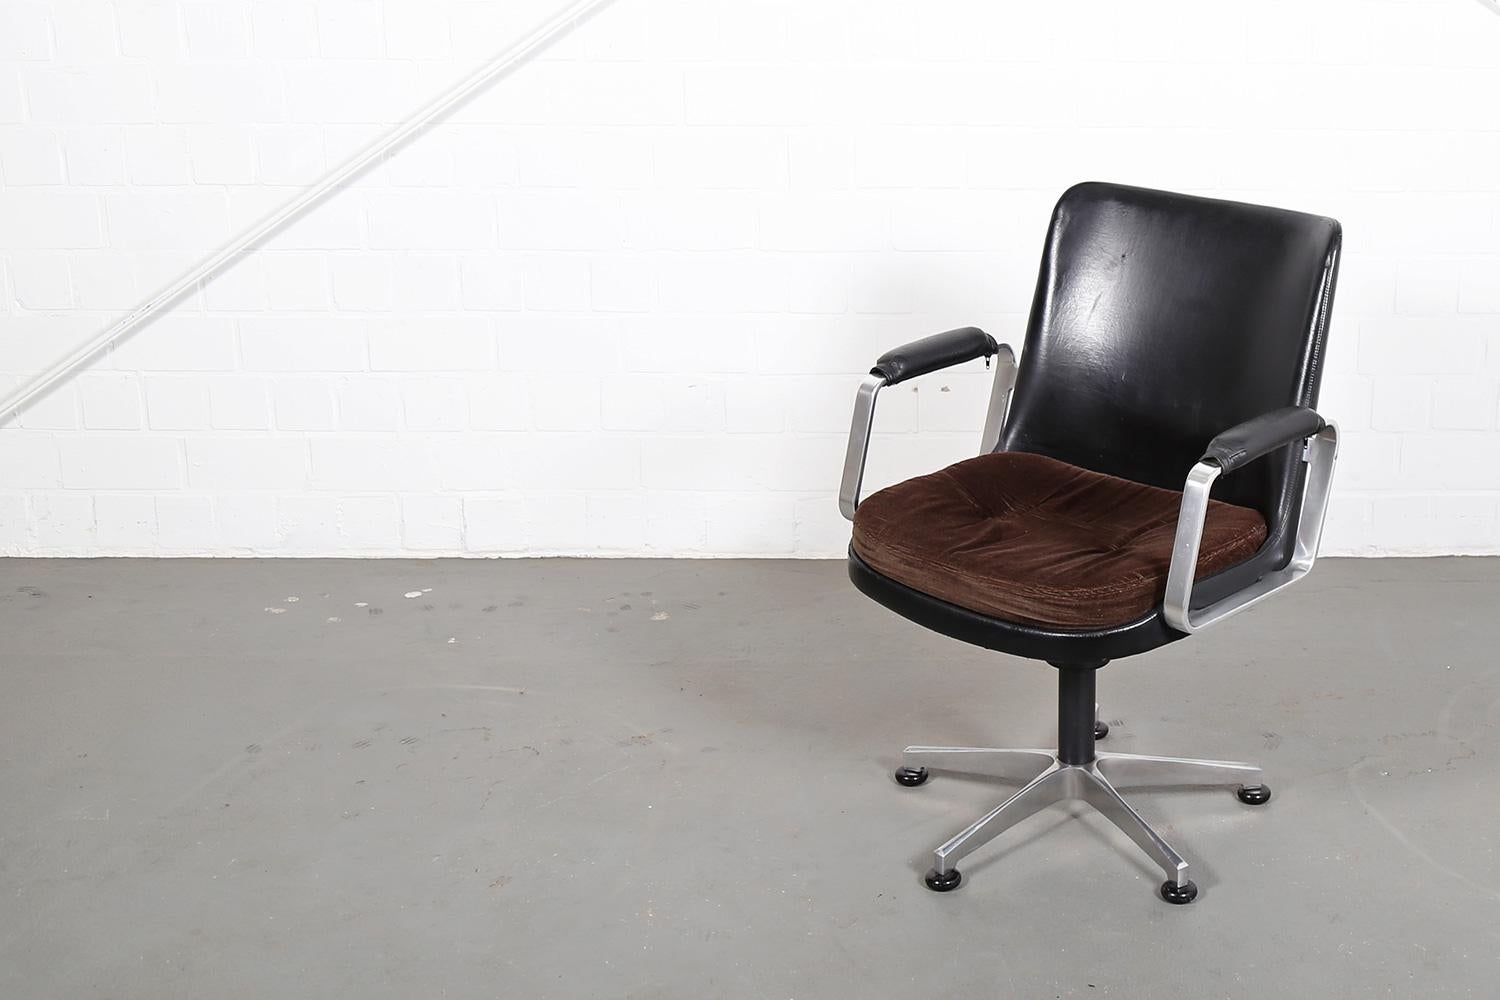 Fröscher “Elizabeth” office chair / conference chair designed by Ib Kofod Larsen (attributed) in a modern Danish design. The backrest is probably covered with black synthetic leather and the seat cushion with a brown cord fabric. Padded armrests.